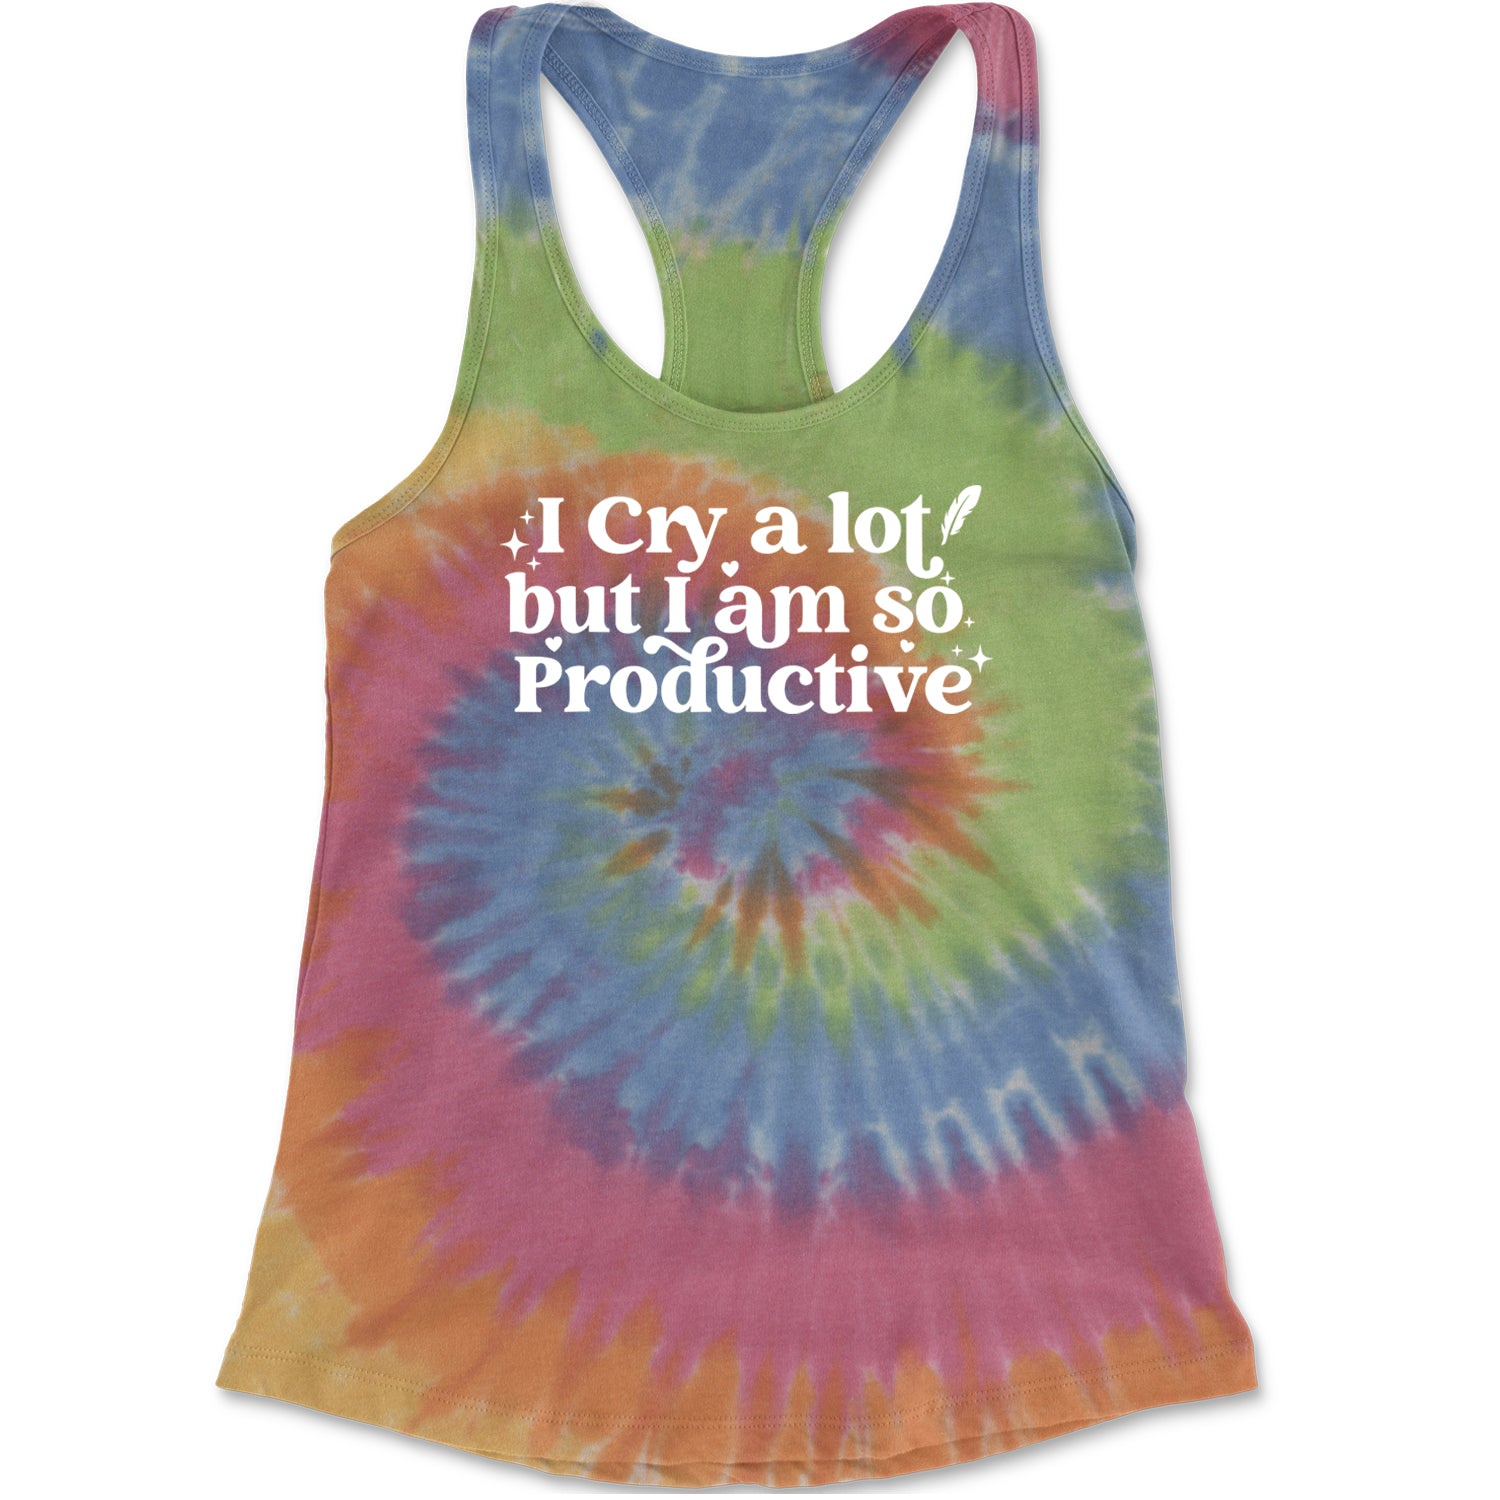 I Cry A Lot But I am So Productive TTPD Racerback Tank Top for Women